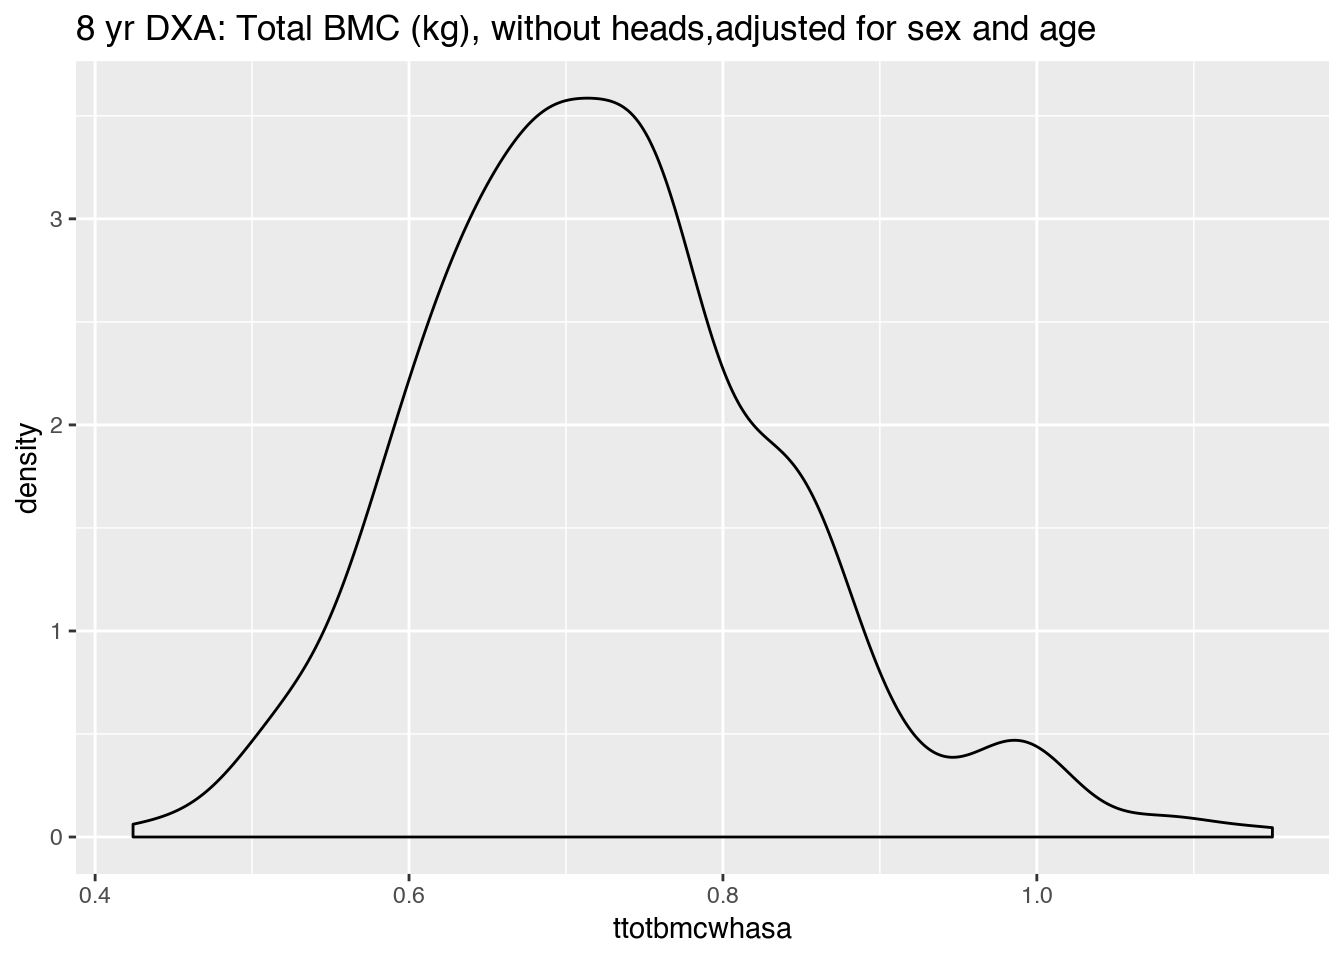 Distribution of whole body (minus head) bone mineral content in kg (ttotbmcwhasa) at 8 years of age (n = 408), adjusted for sex and age, as measured by DXA.